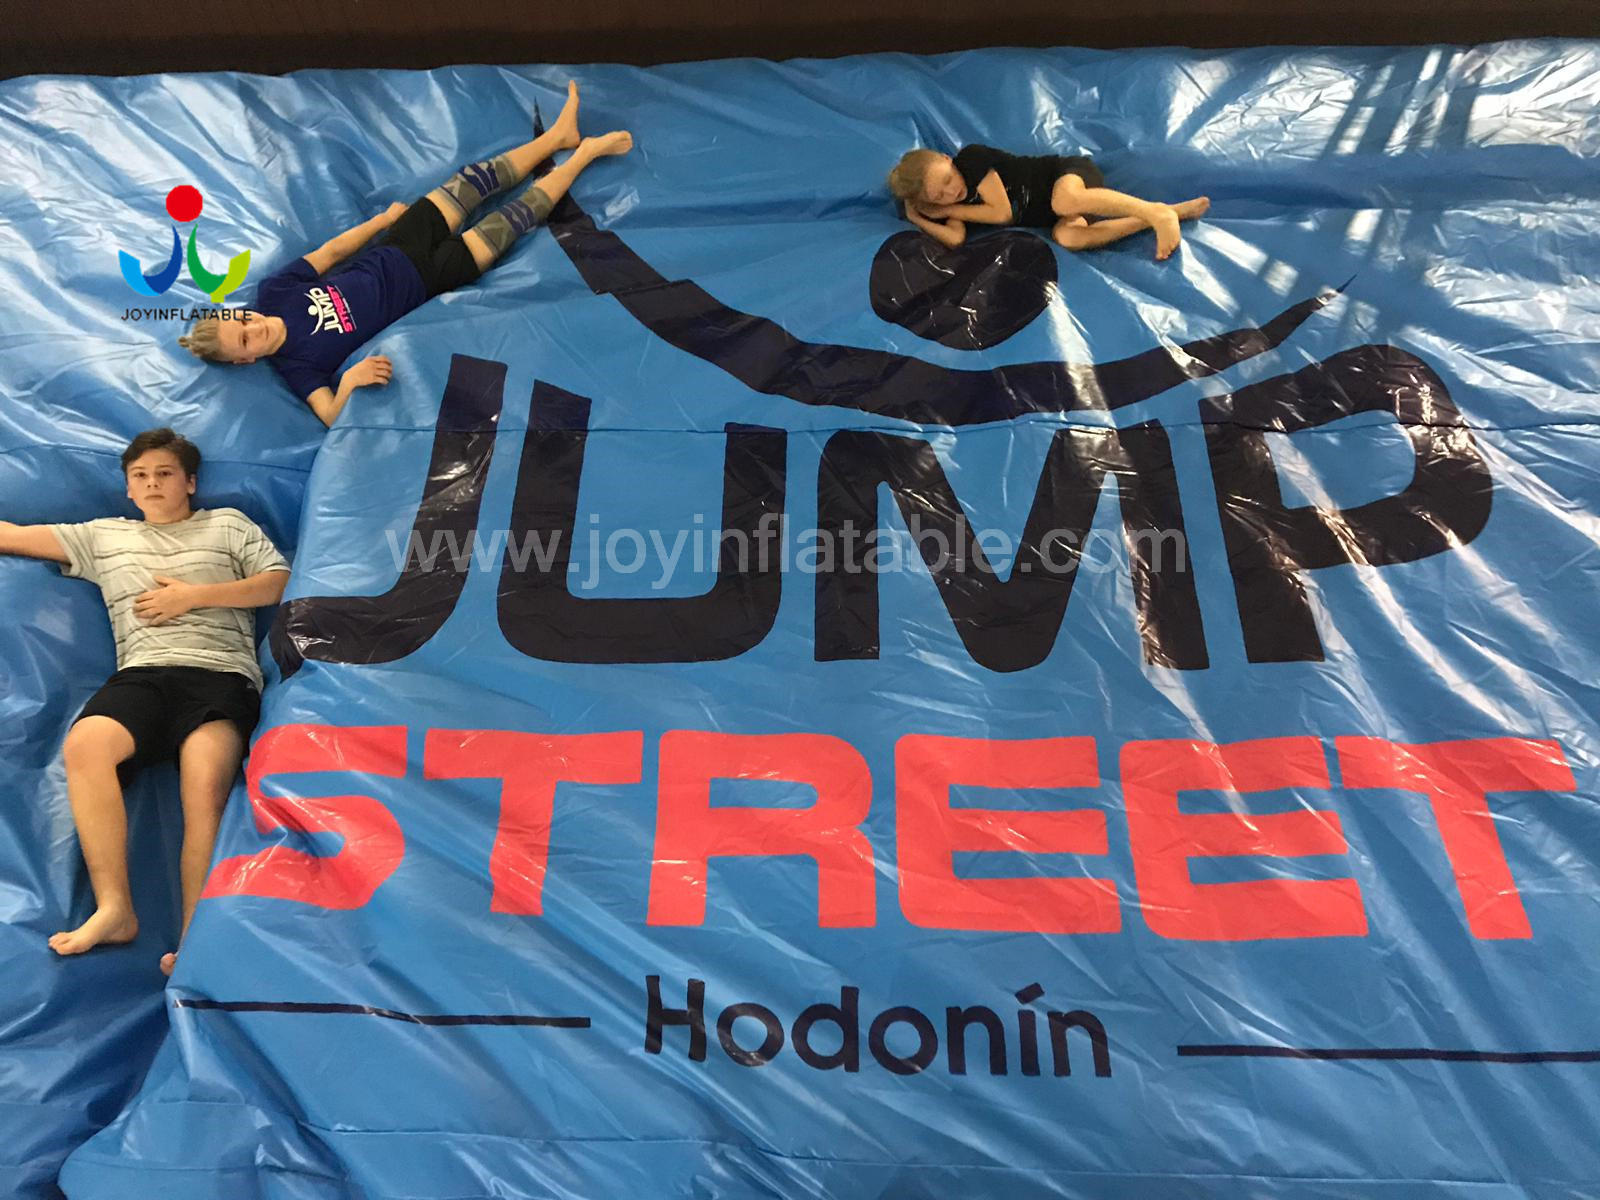 JOY inflatable freestyle airbag manufacturer for kids